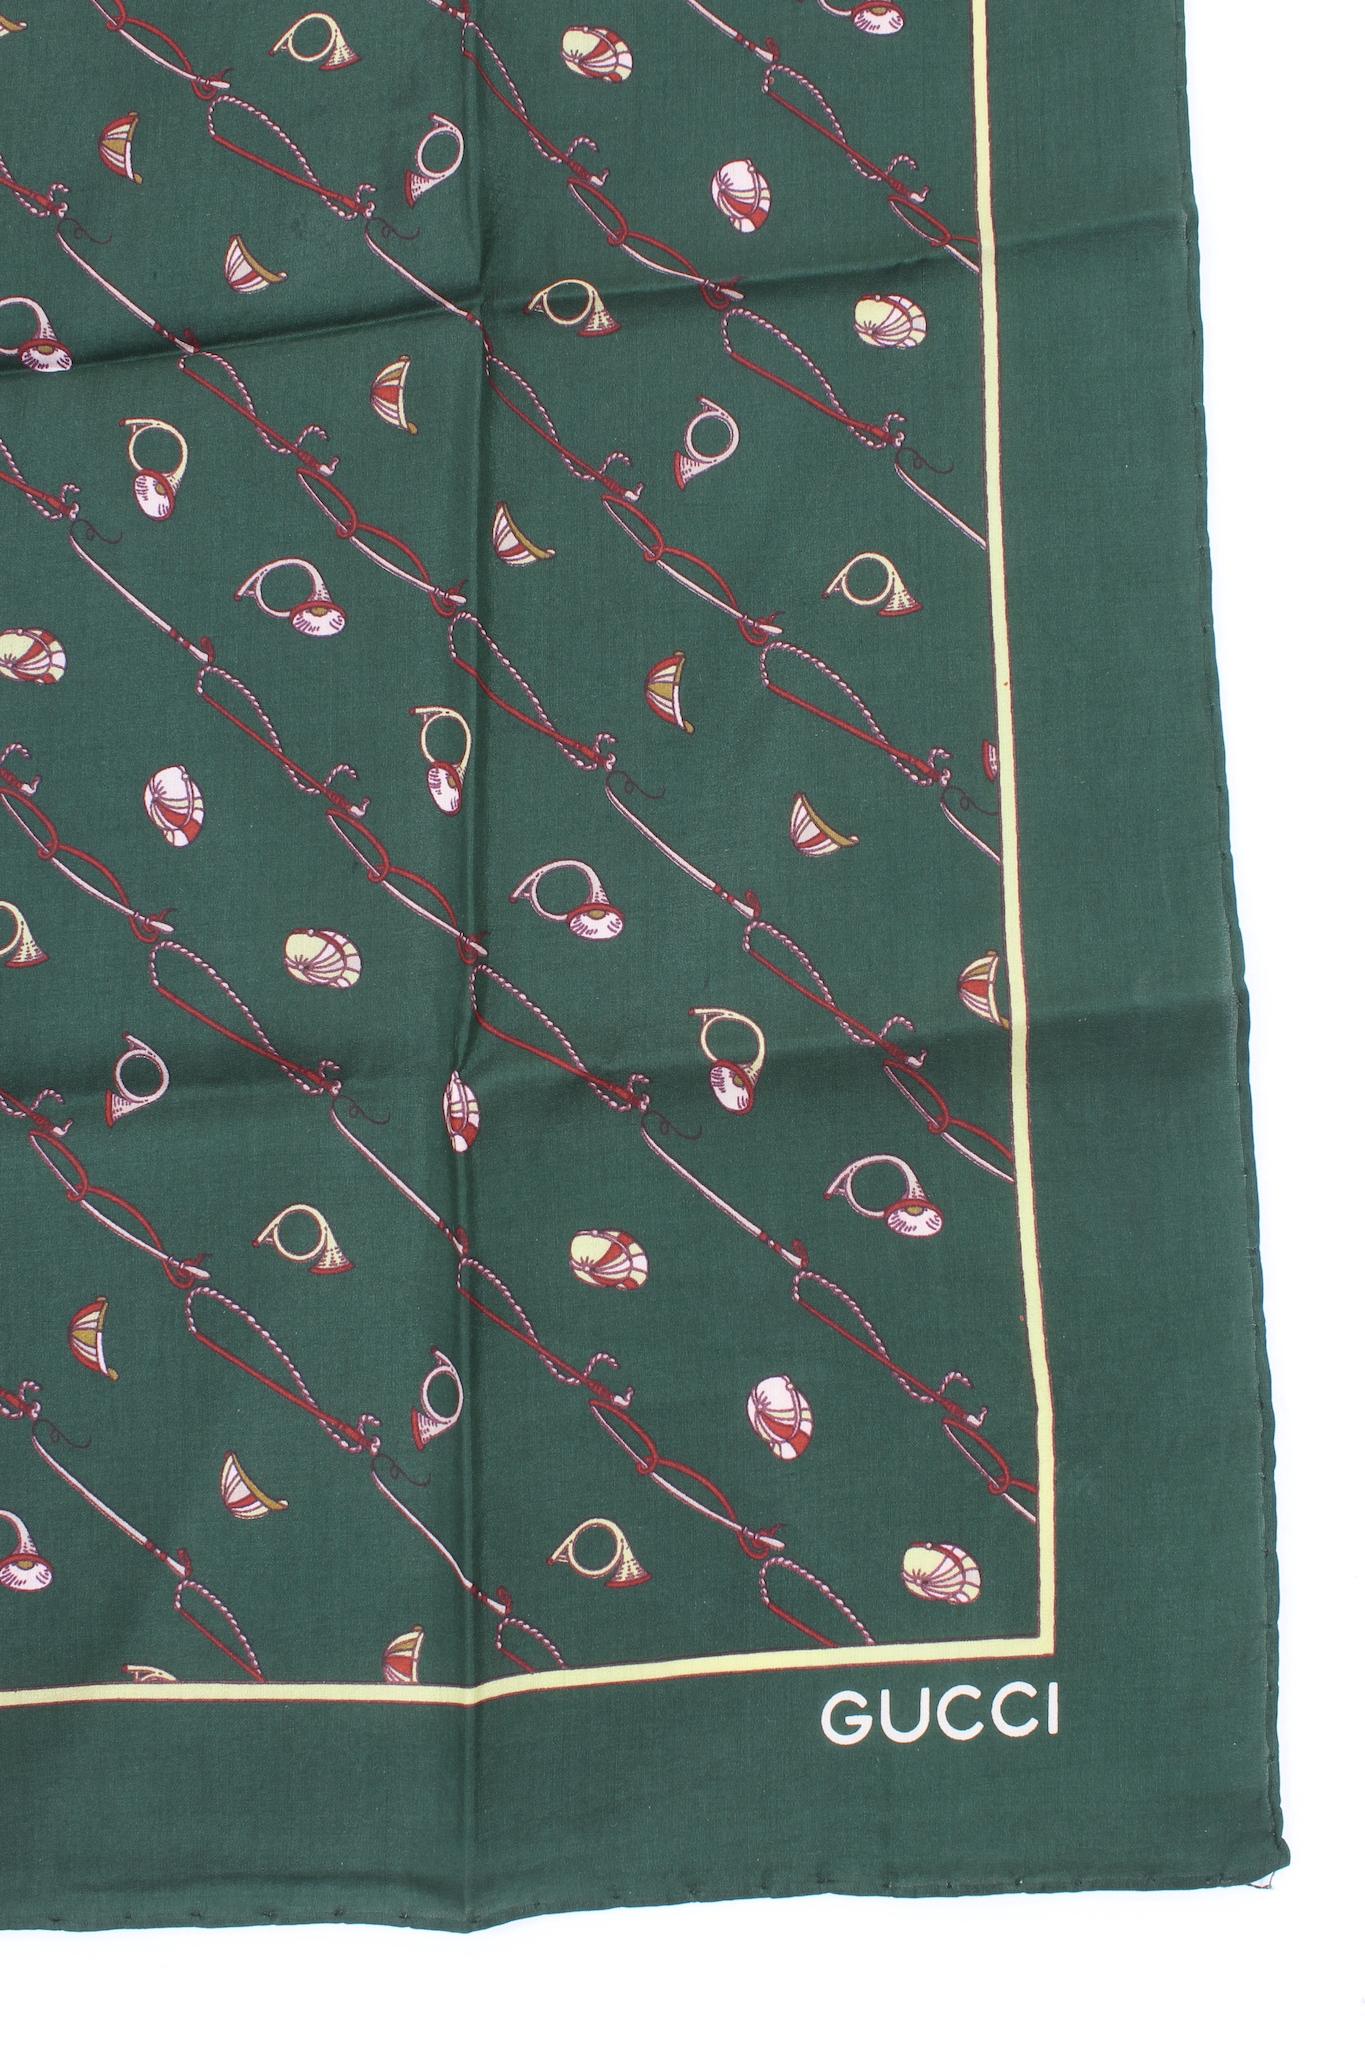 Gucci vintage 70s scarf. Green and burgundy color with equestrian designs, 100% silk fabric. Made in italy.

 

Measures: 56 x 56 cm